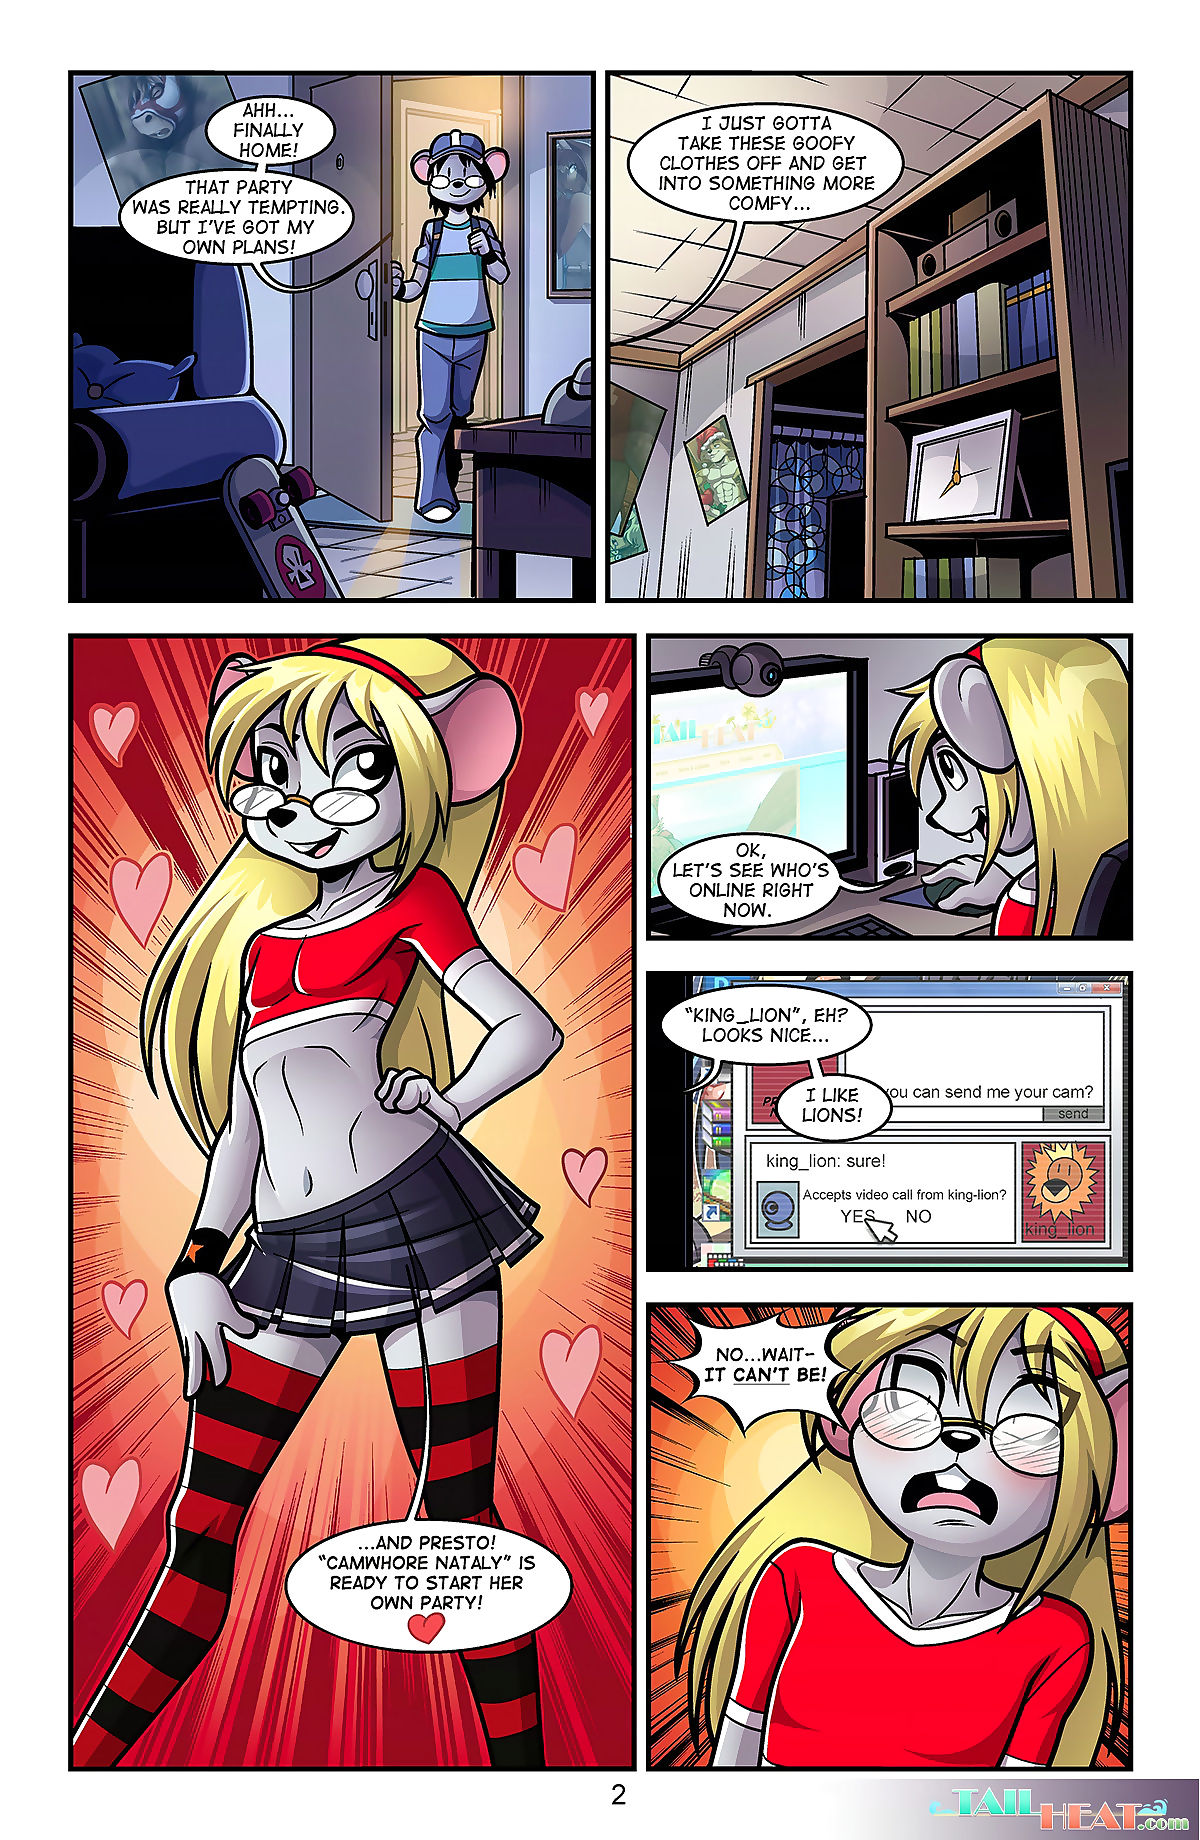 linno camwhore,tail nóng page 1